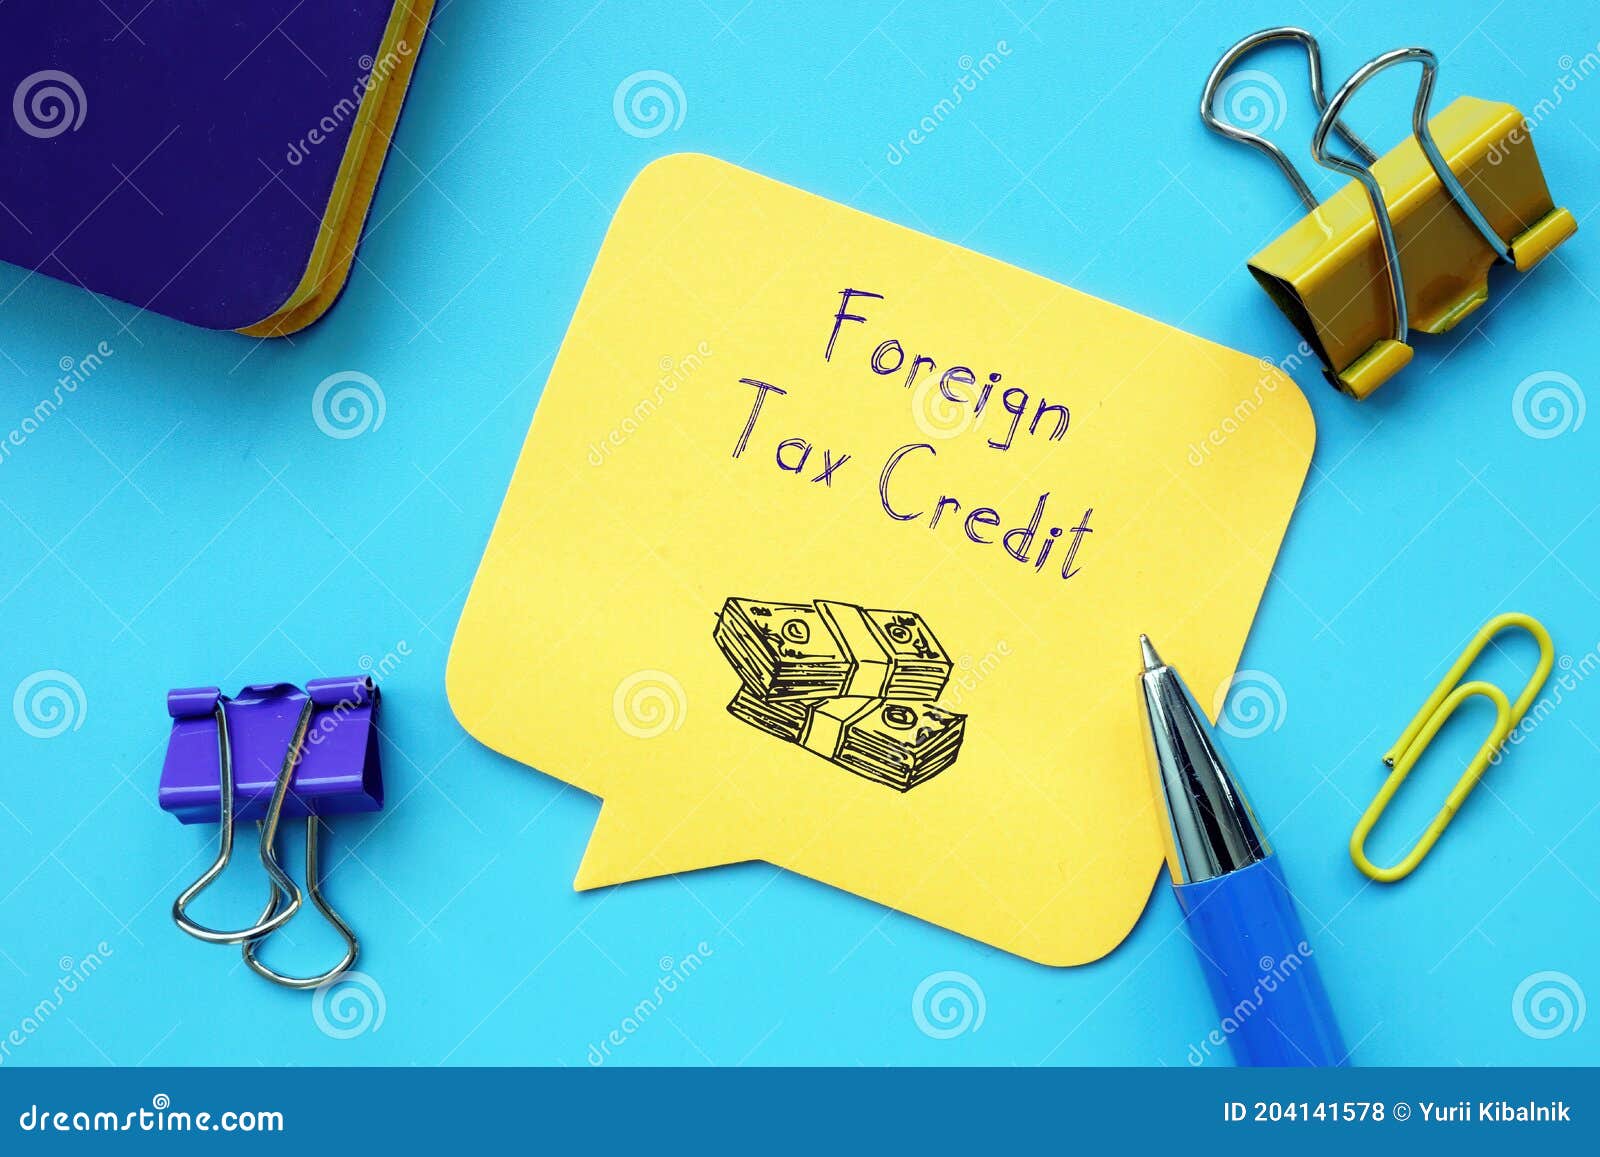 financial-concept-about-foreign-tax-credit-with-sign-on-the-page-stock